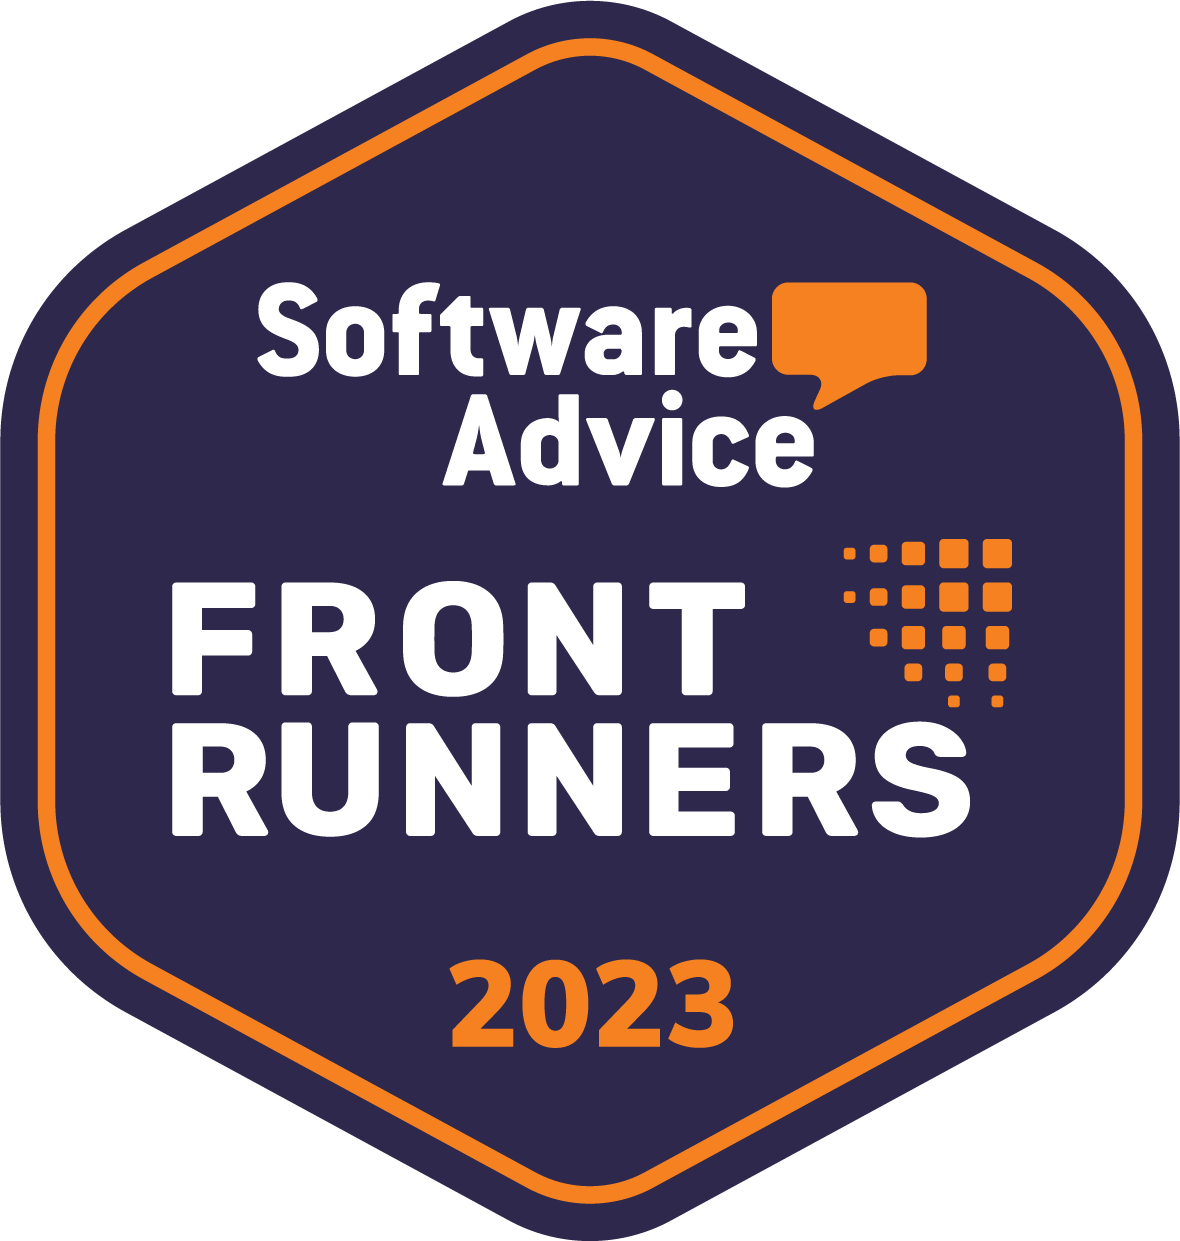 Software advice front runner badge